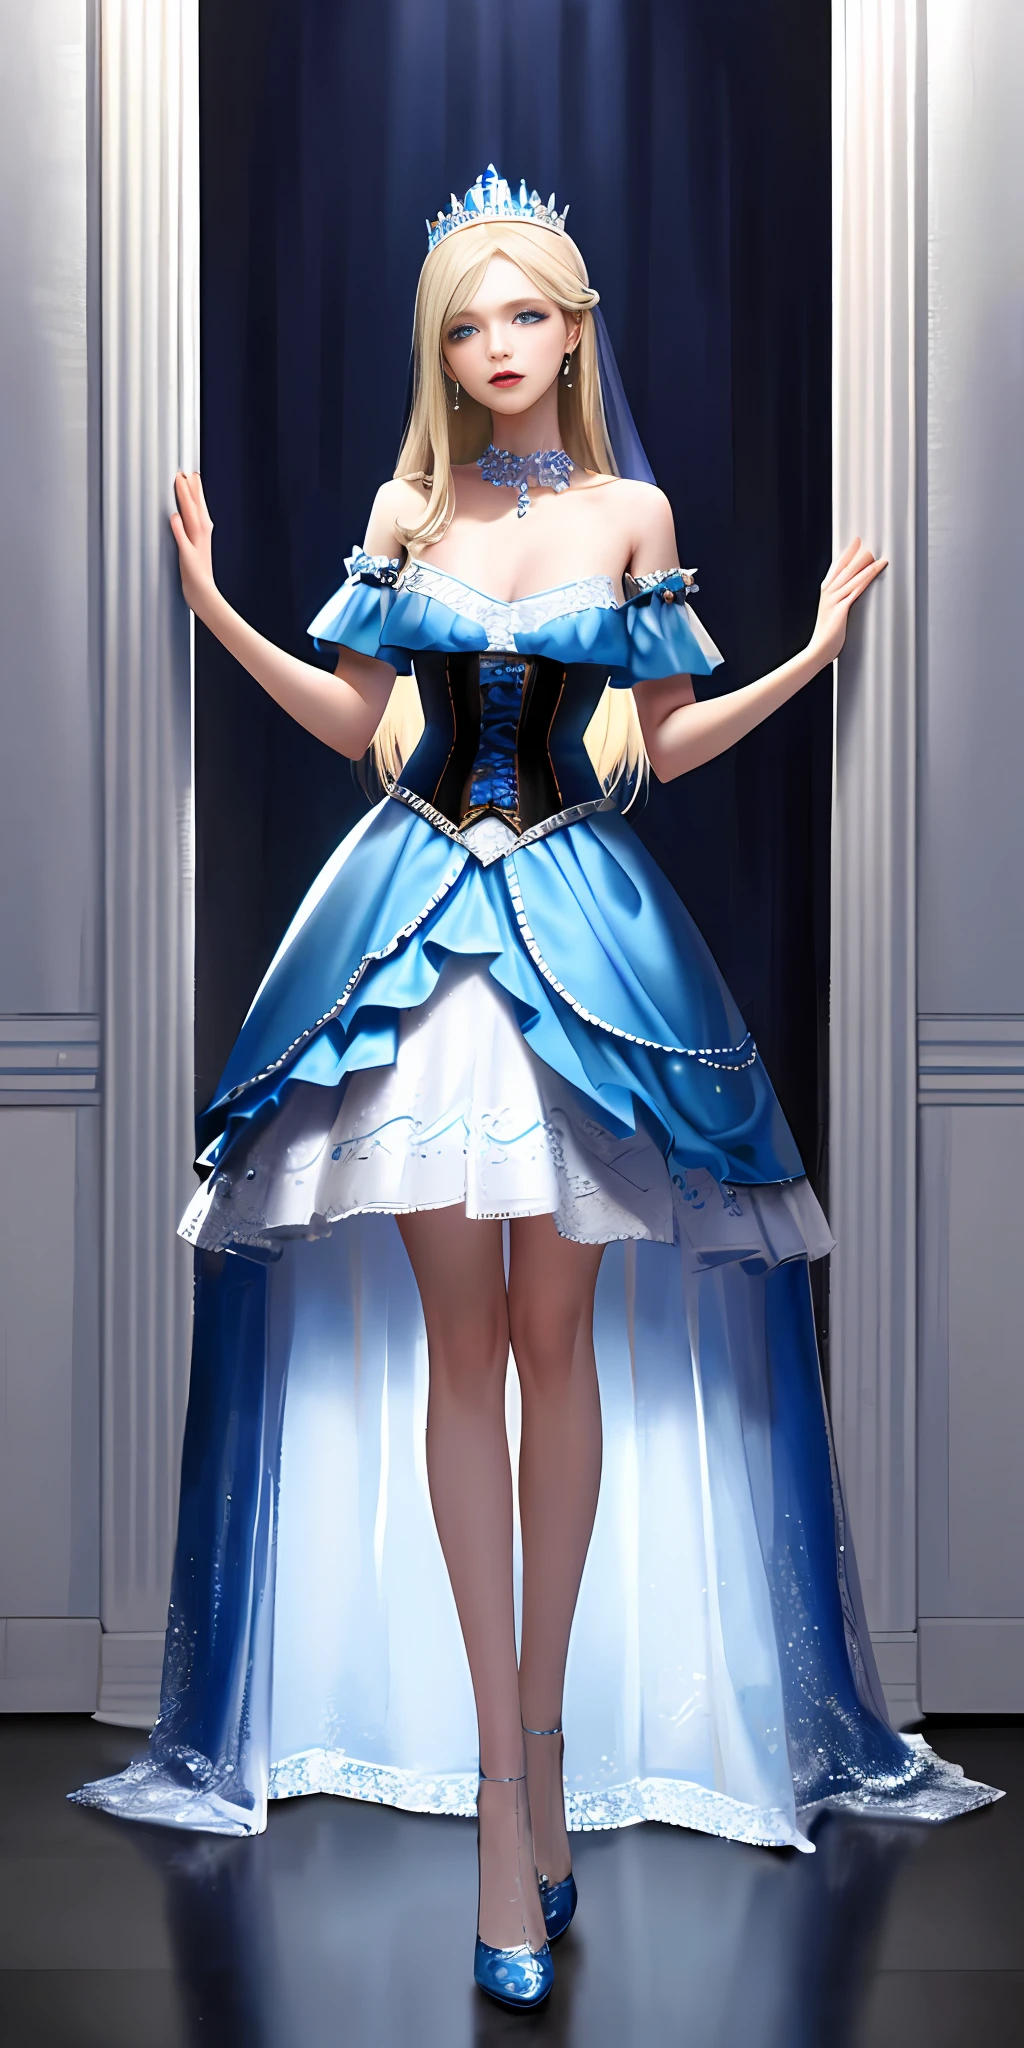 [blue:aqua:0.65] theme, masterpiece, a girl's masterpiece, detailed visual art, blue eyes, light blonde hair, long hair, collarbone, royal princess, elegant, gorgeous quinceanera corset, corset piercing, detailed layered skirt, [detailed frills: 0.1], [frilled dress: 0.1], embroidery, [details princess dress: 0.1], off-the-shoulder, big breasts: 1.3, open crotch, thigh seam, garter belt, groin, [NSFW| uncensored], (simple background: 1.1), low-winged, full-body